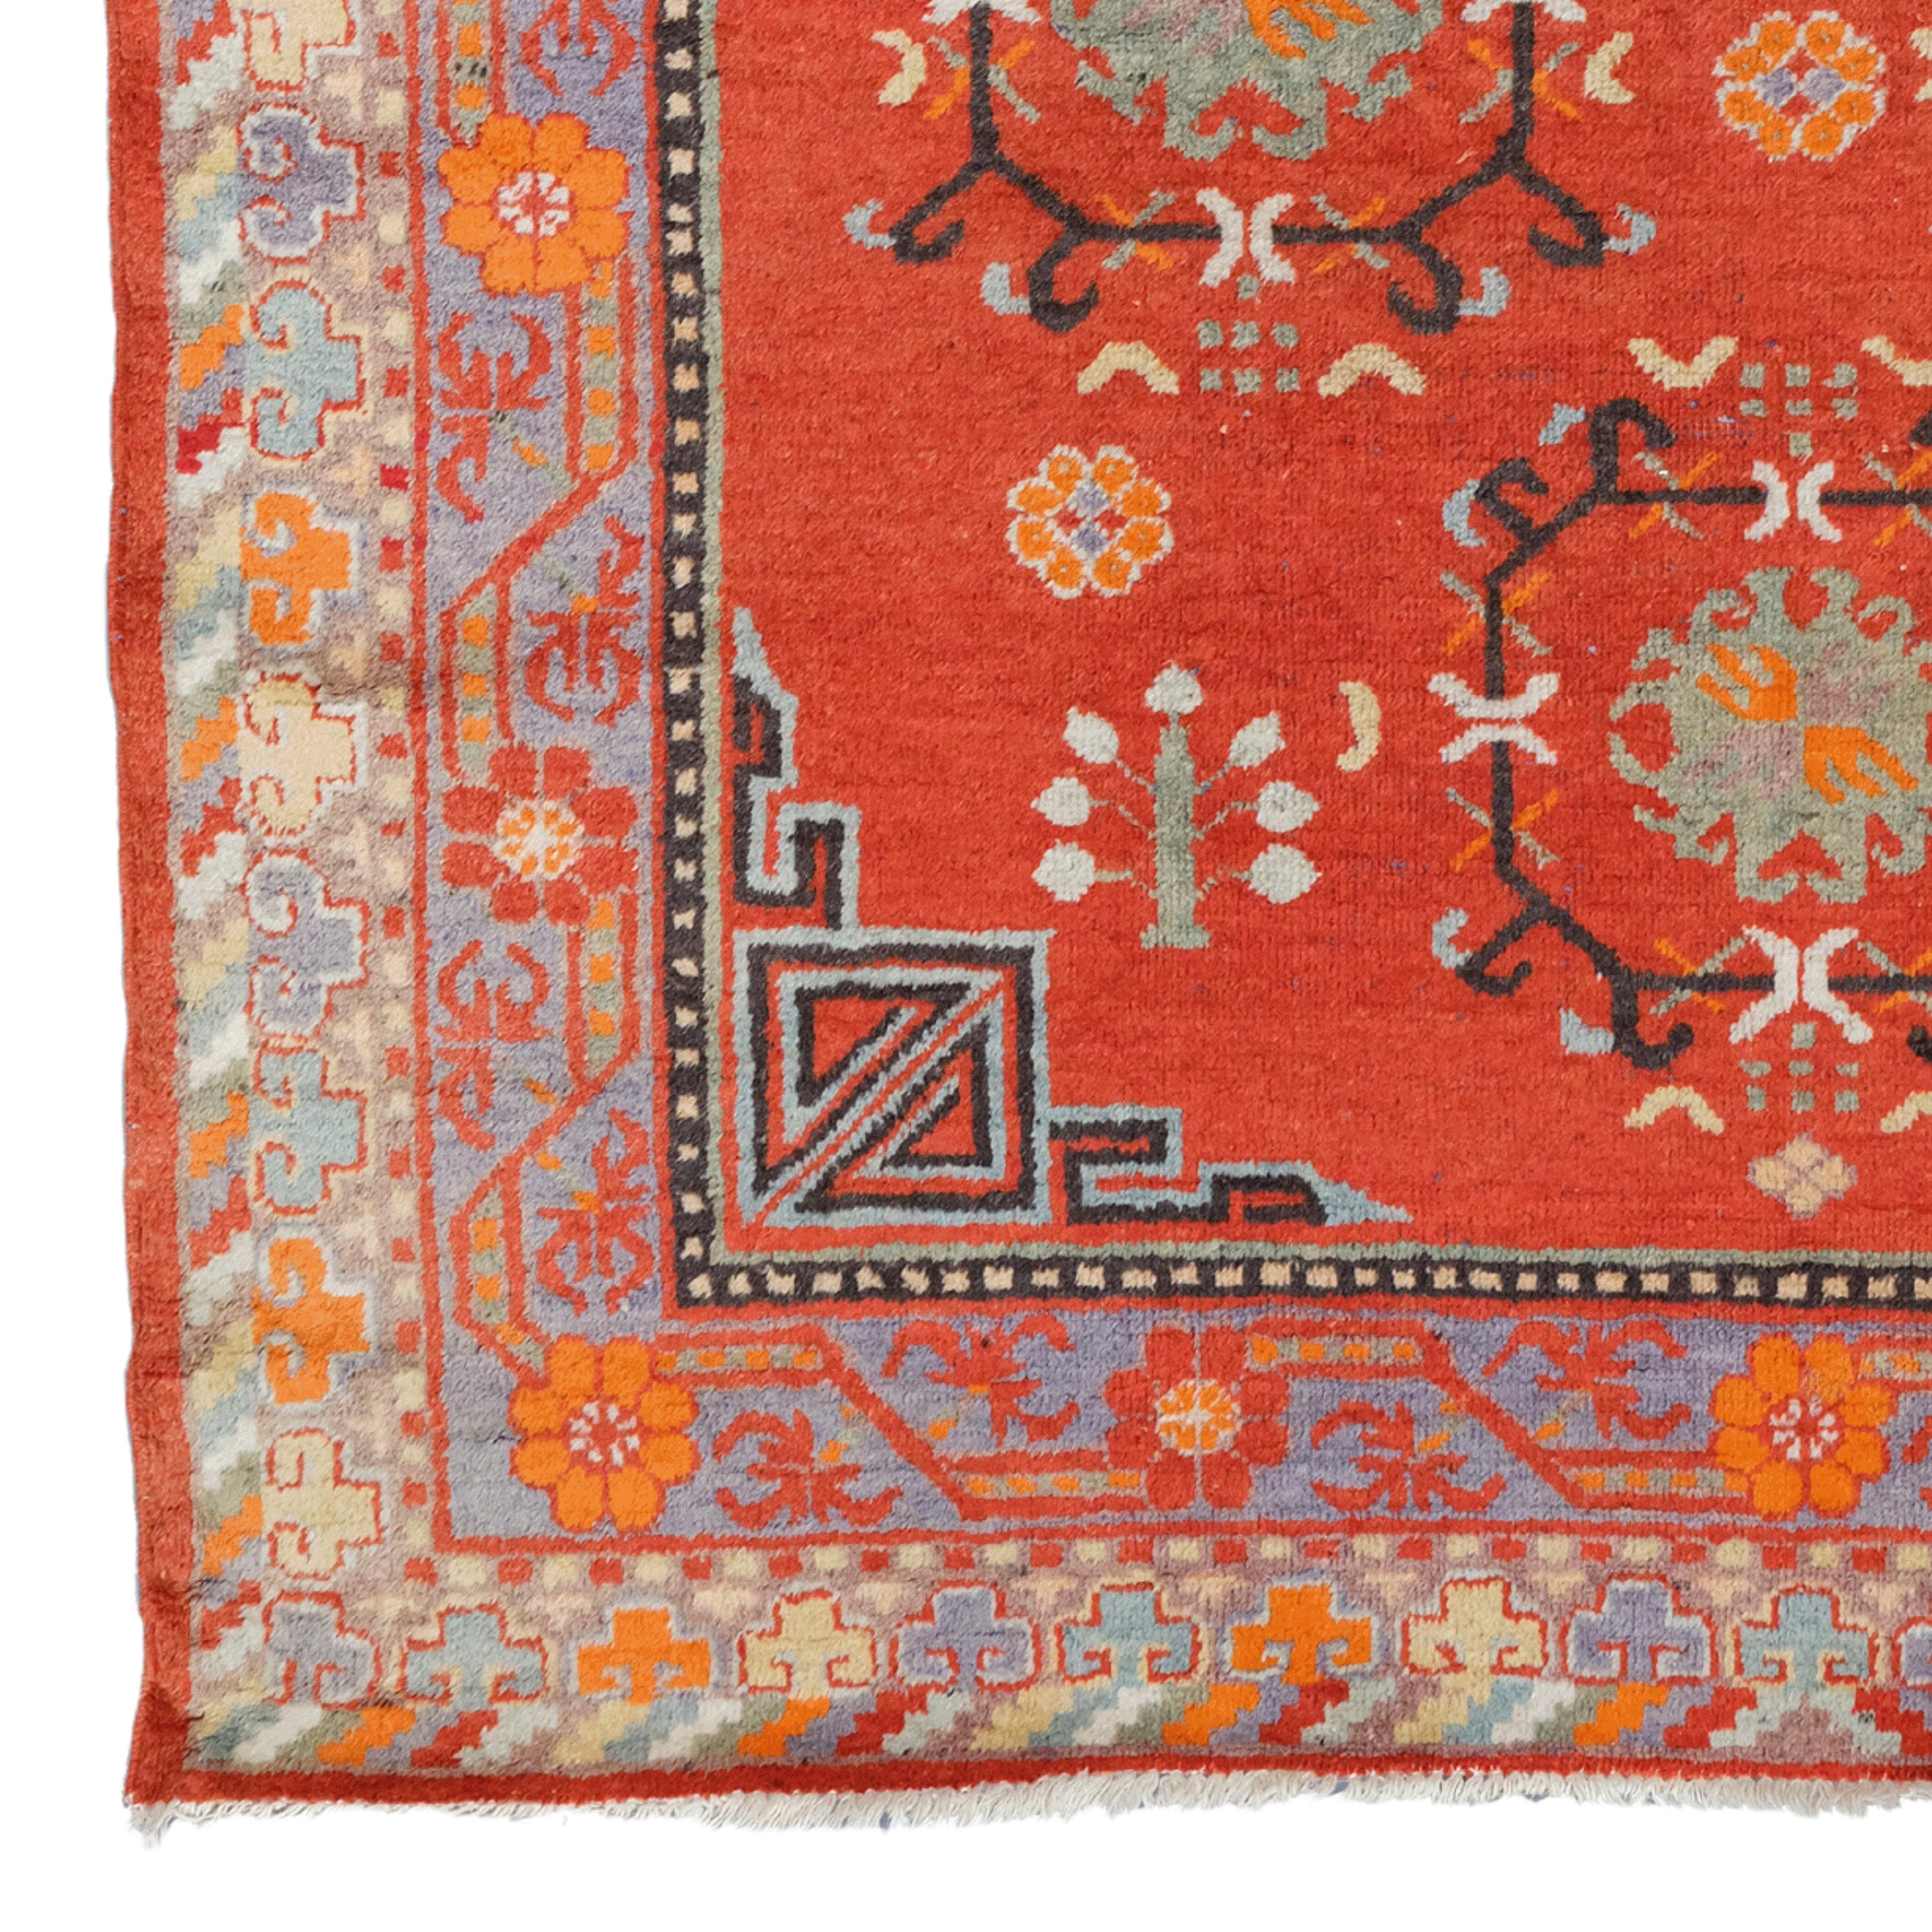 This extraordinary carpet will fascinate you with its illustrated design and vibrant colors that reflect the rich history and craftsmanship of the period. Each stitch tells the story of skilled craftsmen who masterfully crafted every detail. Various